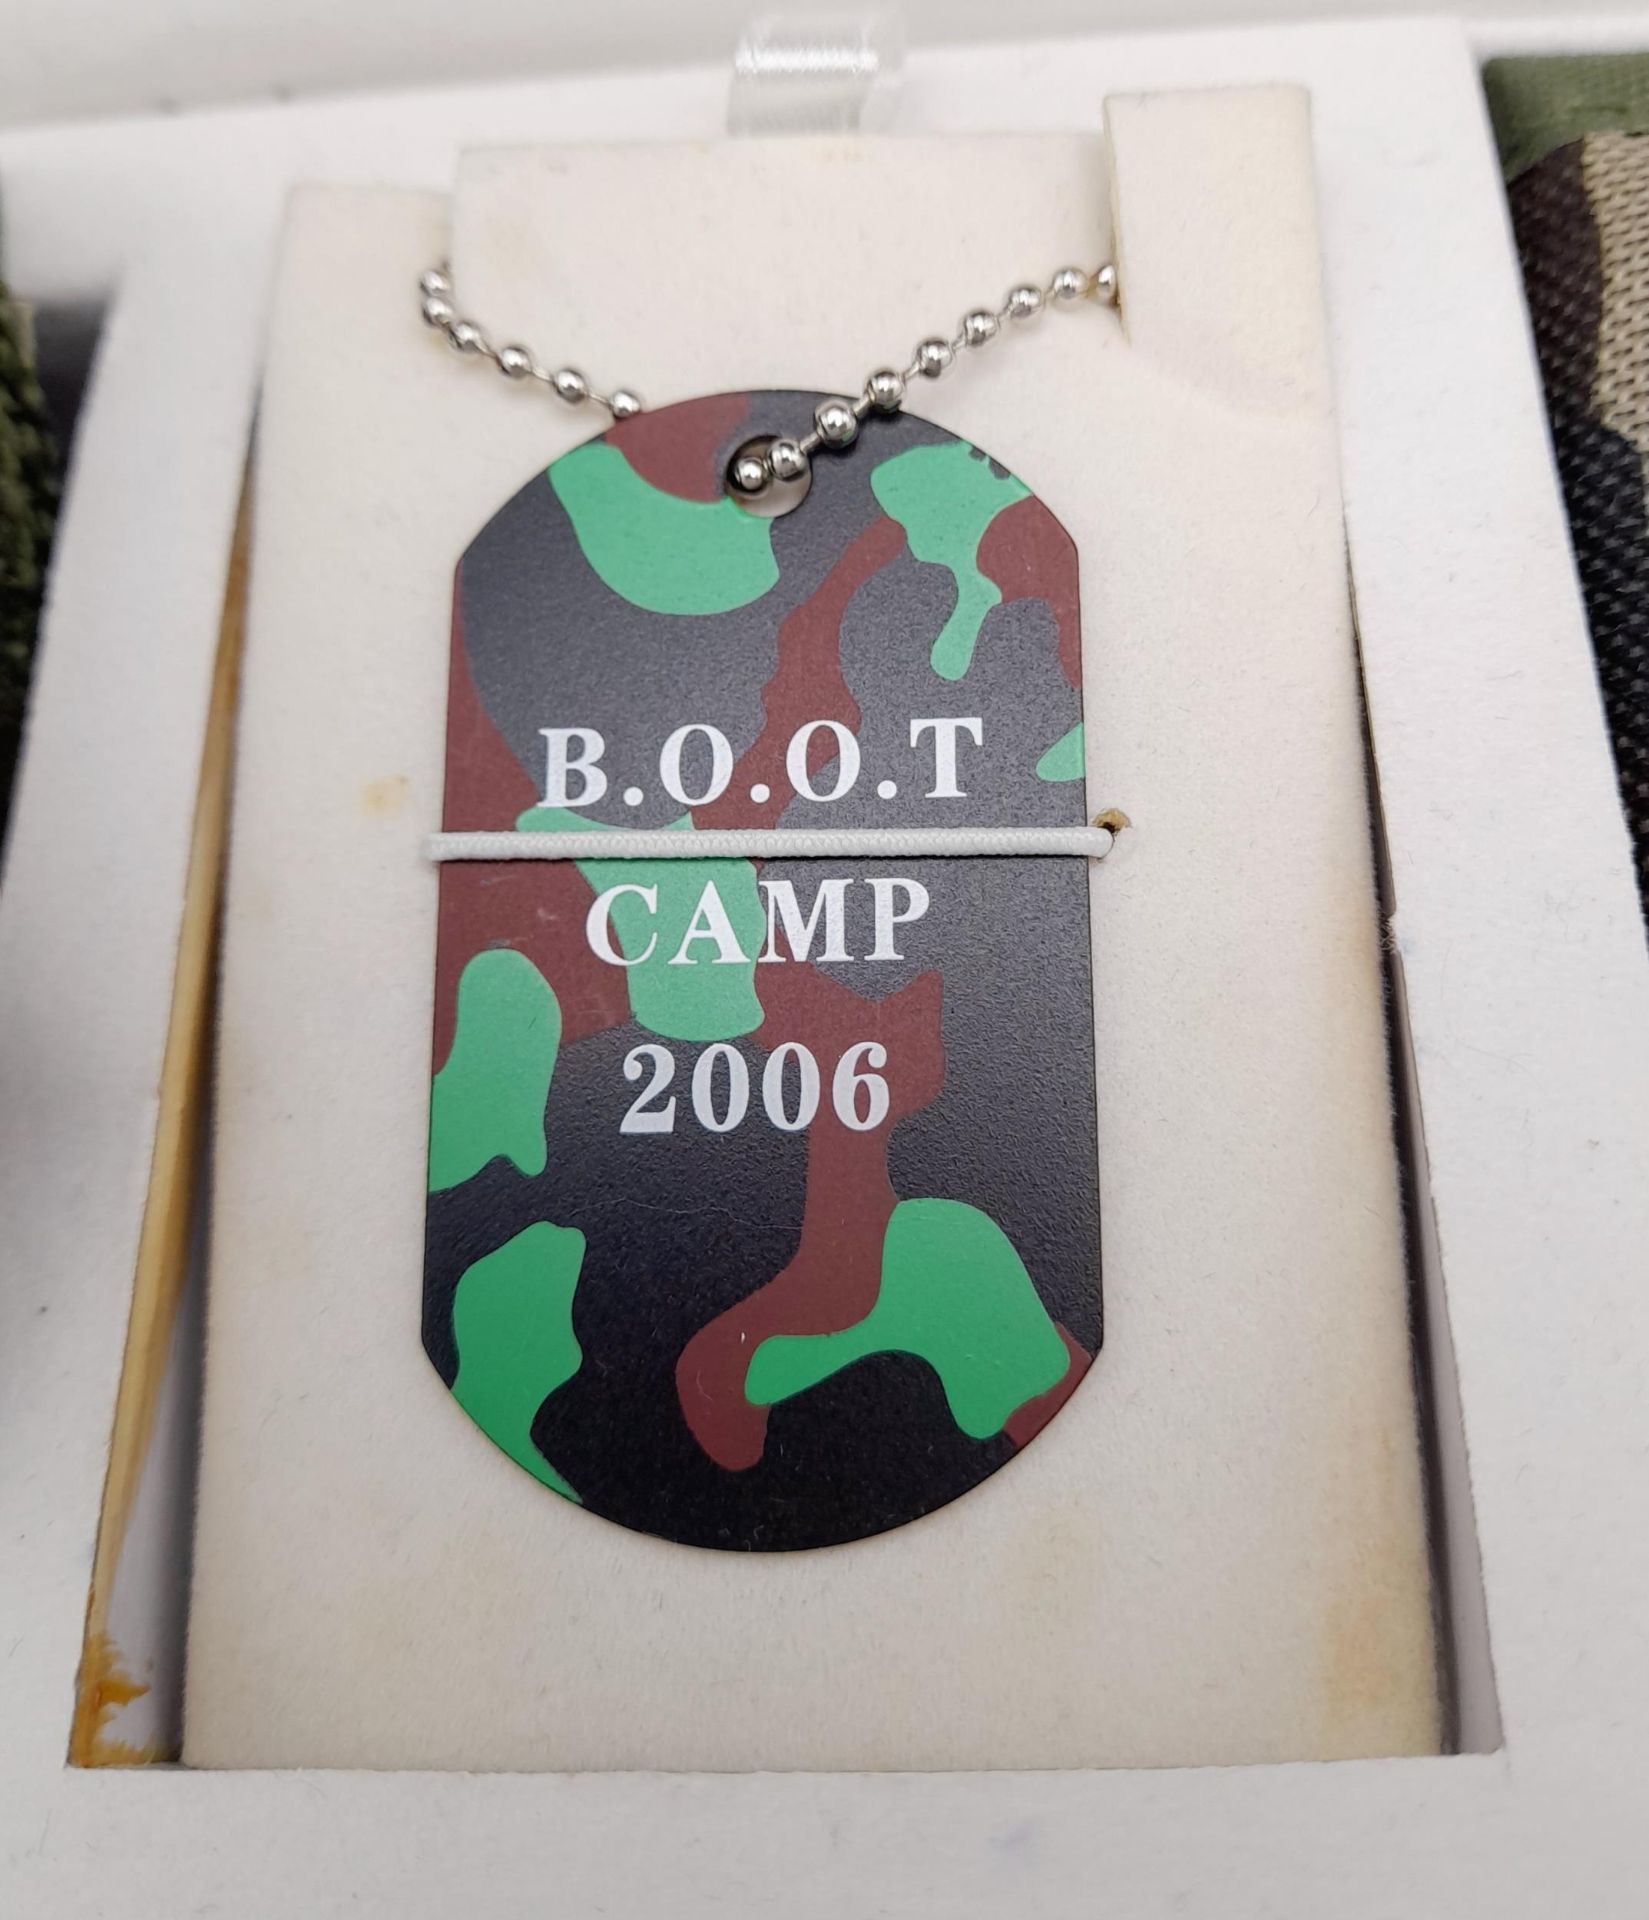 A U.S.A. Army Boot Camp set (dated 2006) consisting of a watch with compass, a dog tag with chain, a - Image 3 of 6